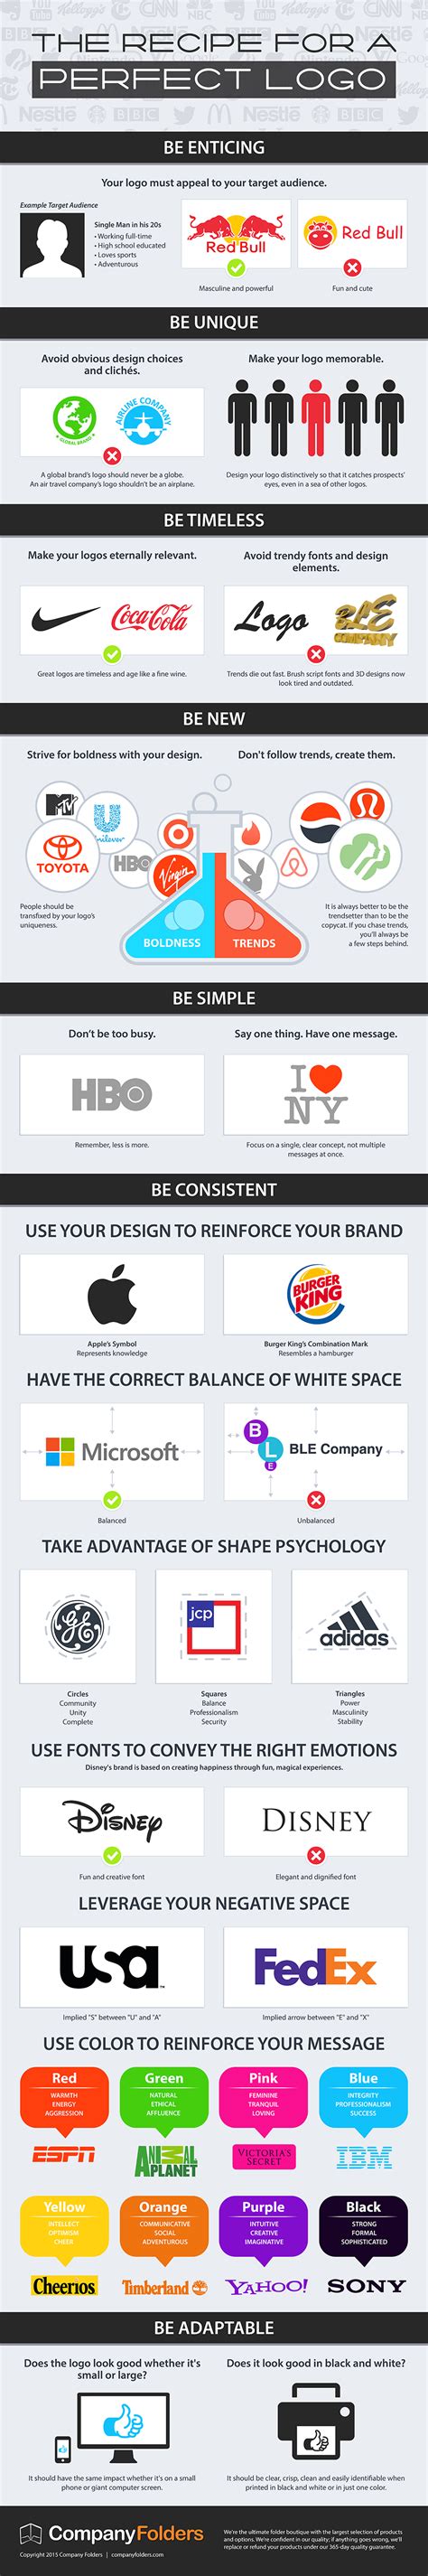 How to Design the Perfect Business Logo (Infographic)